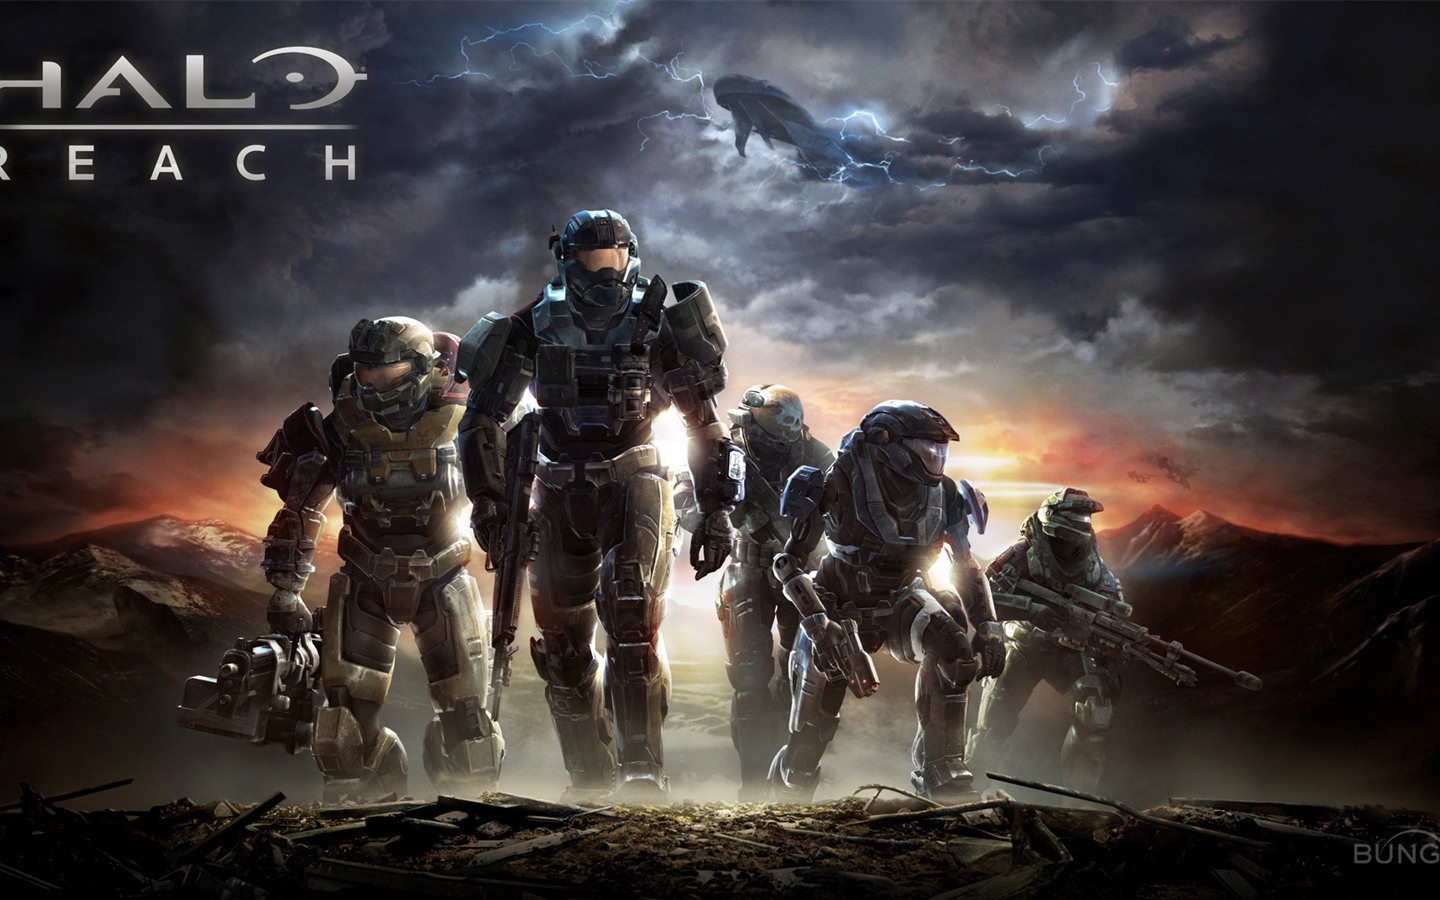 Halo game HD wallpapers #17 - 1440x900